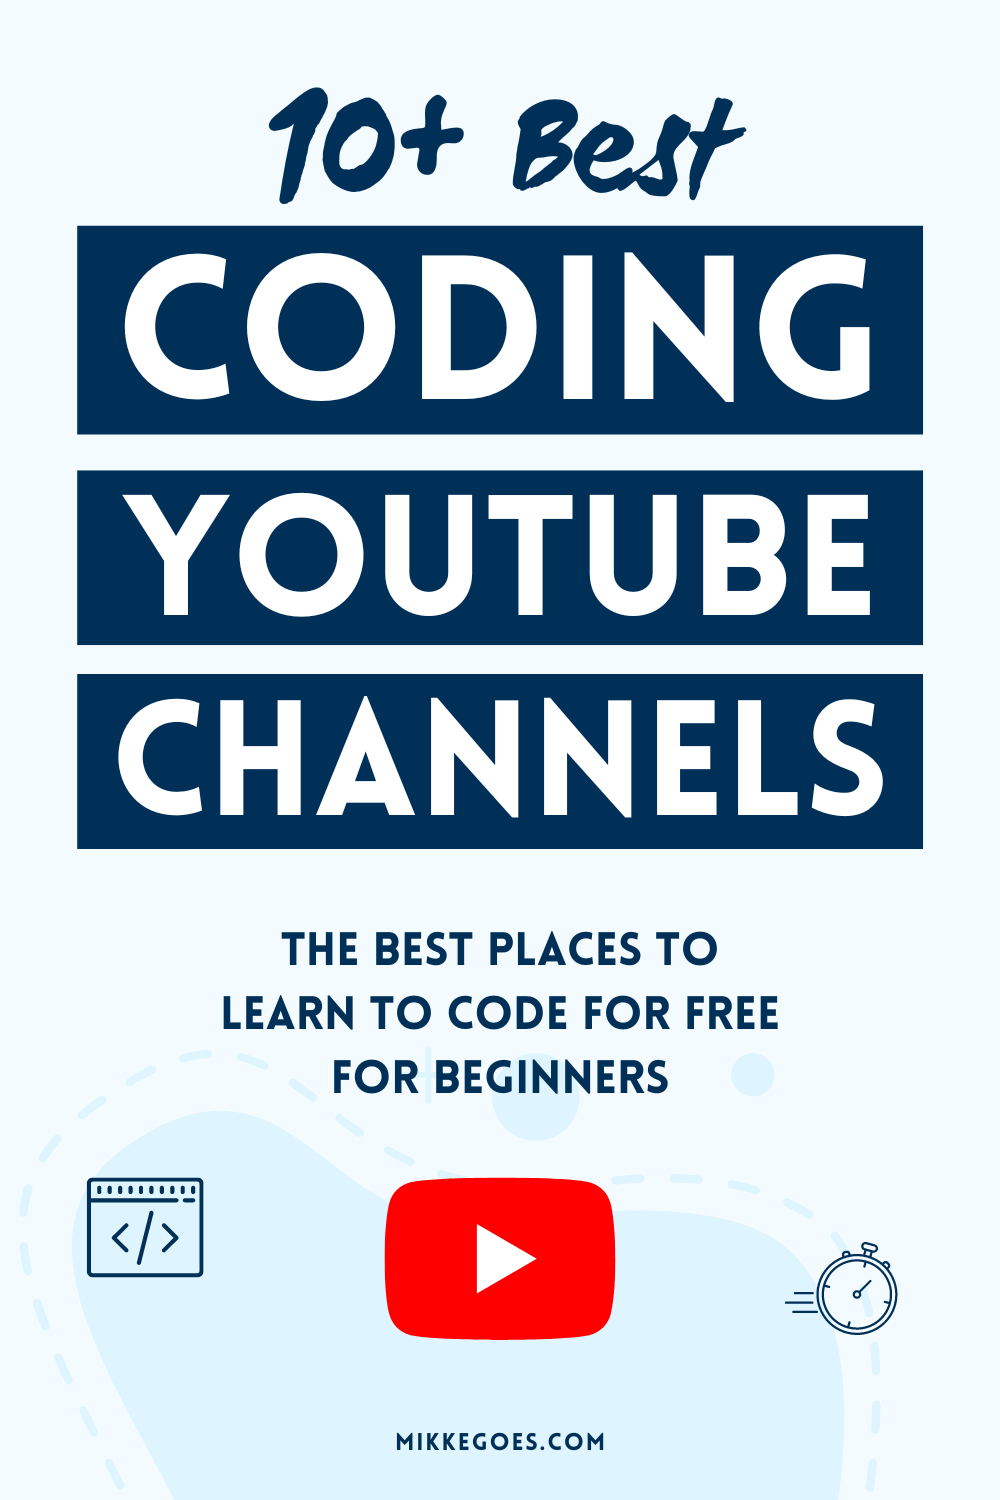 The best YouTube coding channels for beginners to learn to code for free